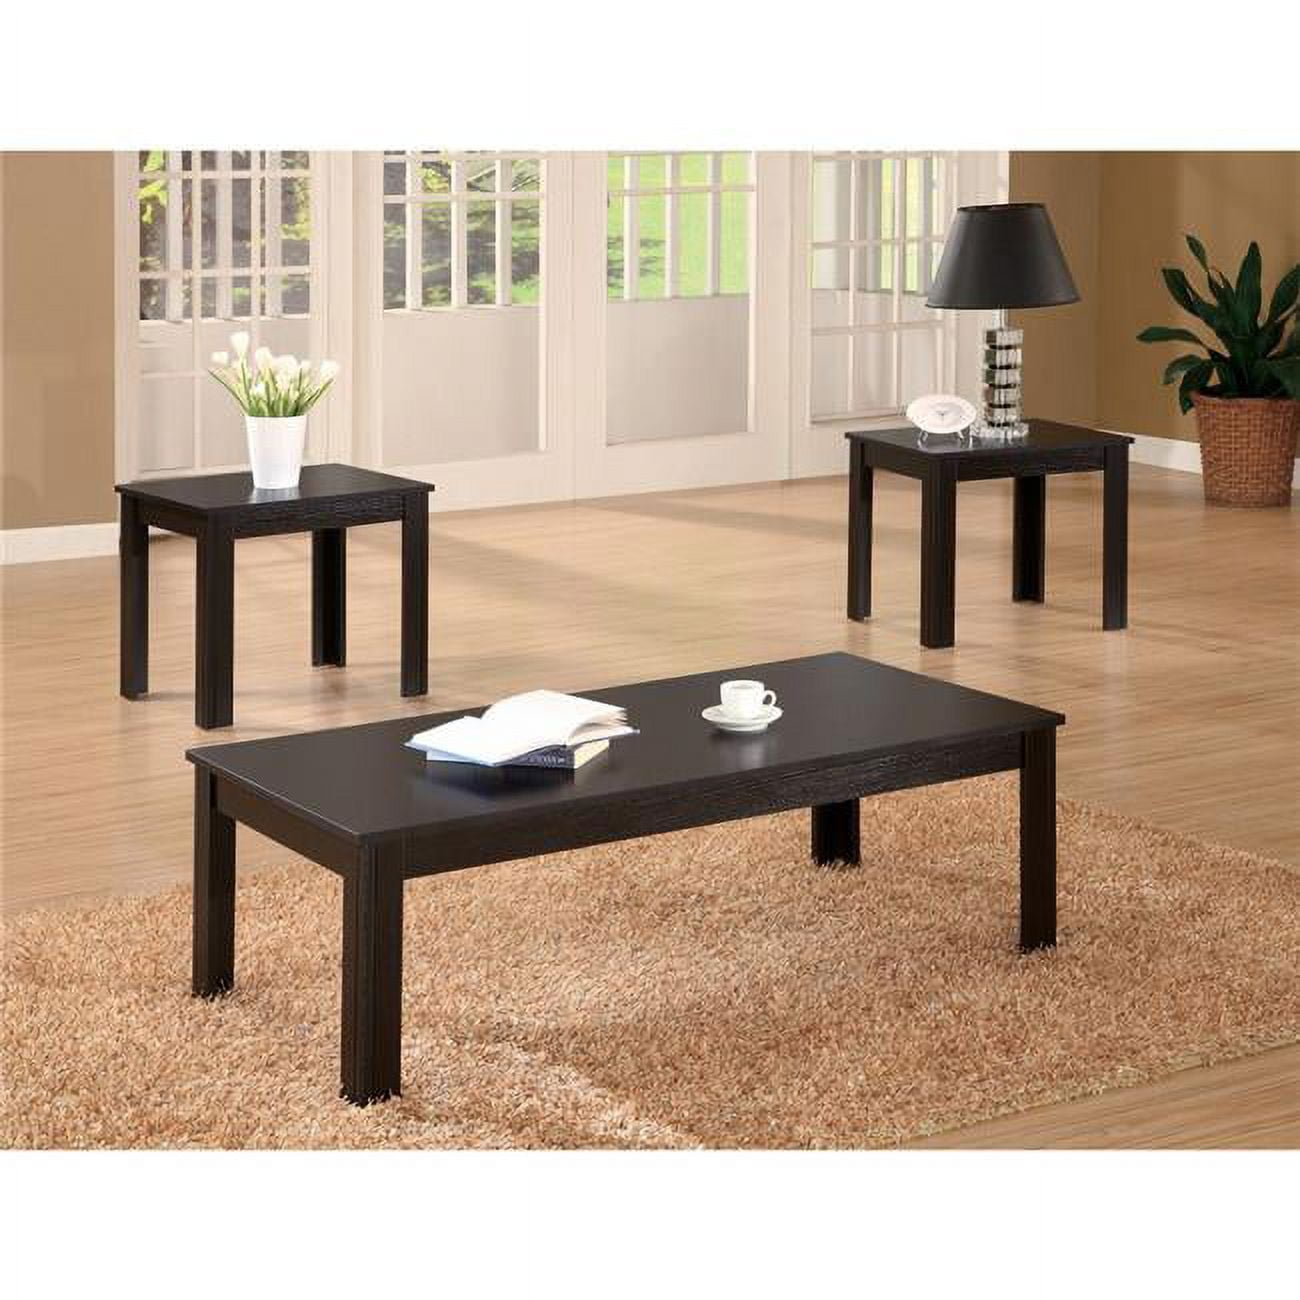 Picture of Benzara BM156129 15 x 44 x 22 in. Attractive Black Occasional Table Set - 3 Piece